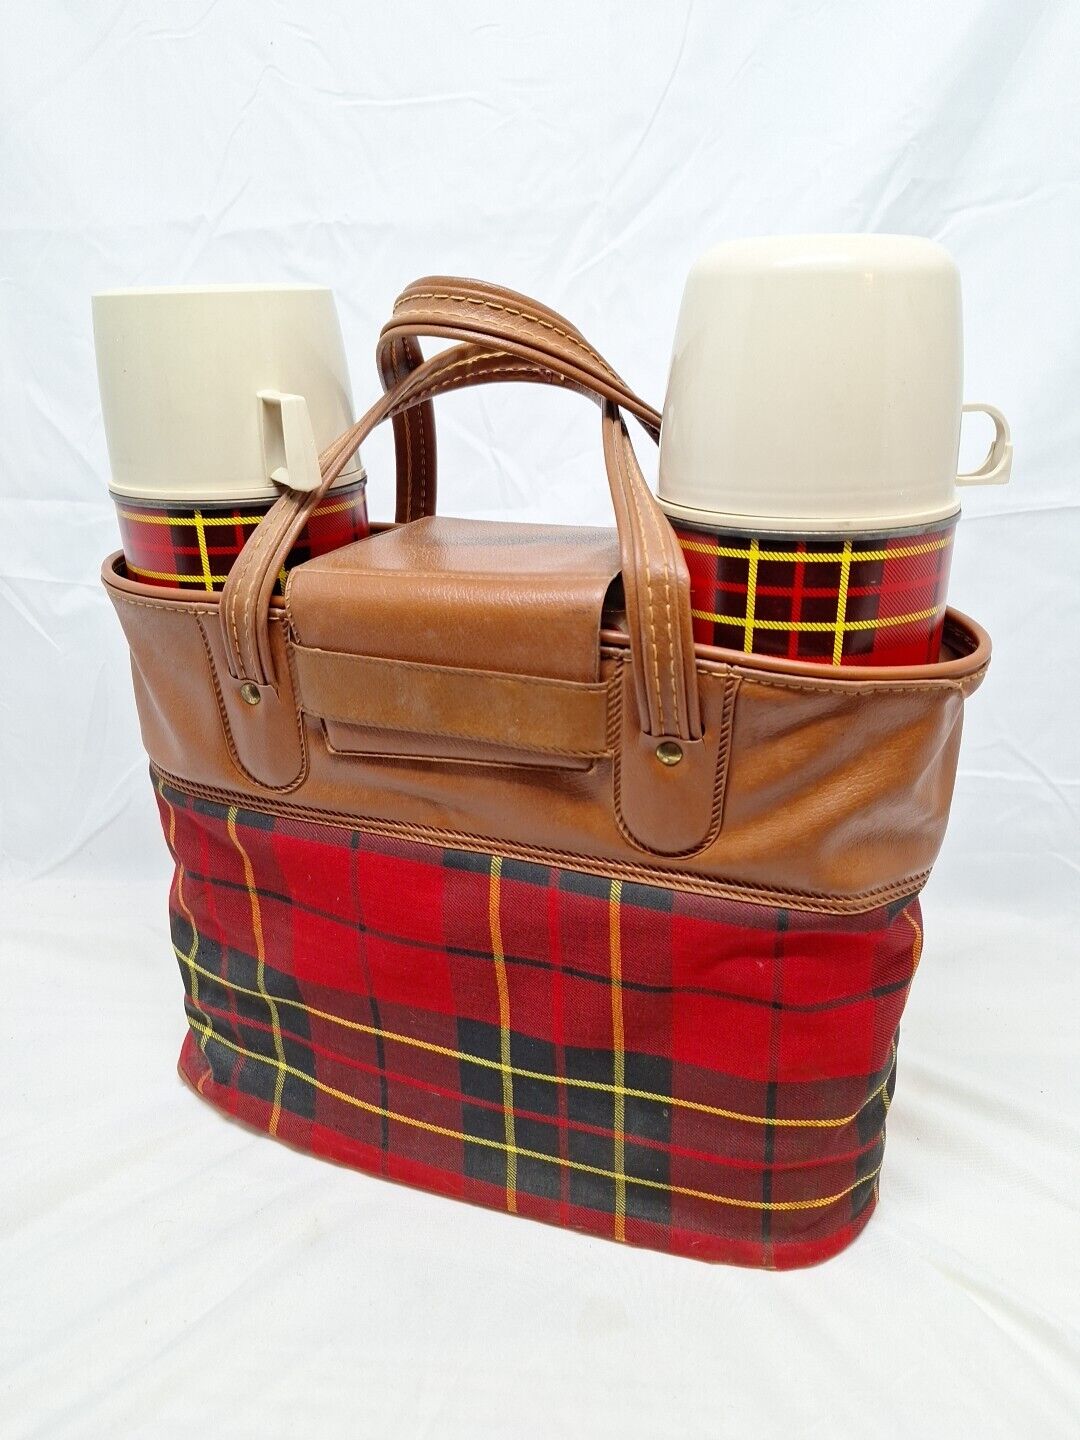 Vintage Red Plaid THERMOS Travel Picnic Set Canvas Bag King Seeley 1973 70's